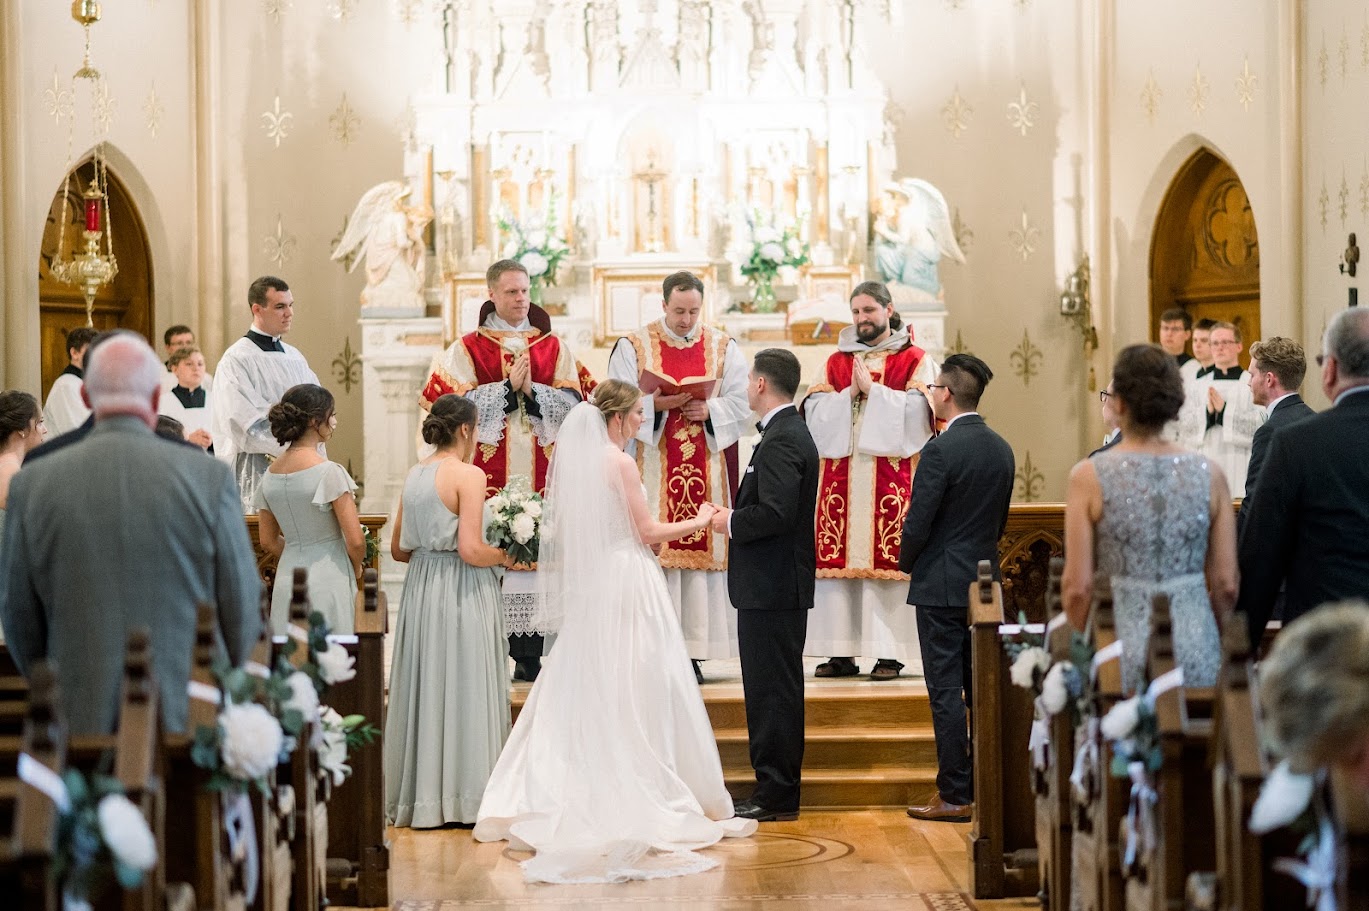 Top Catholic Wedding Planners in The United States!